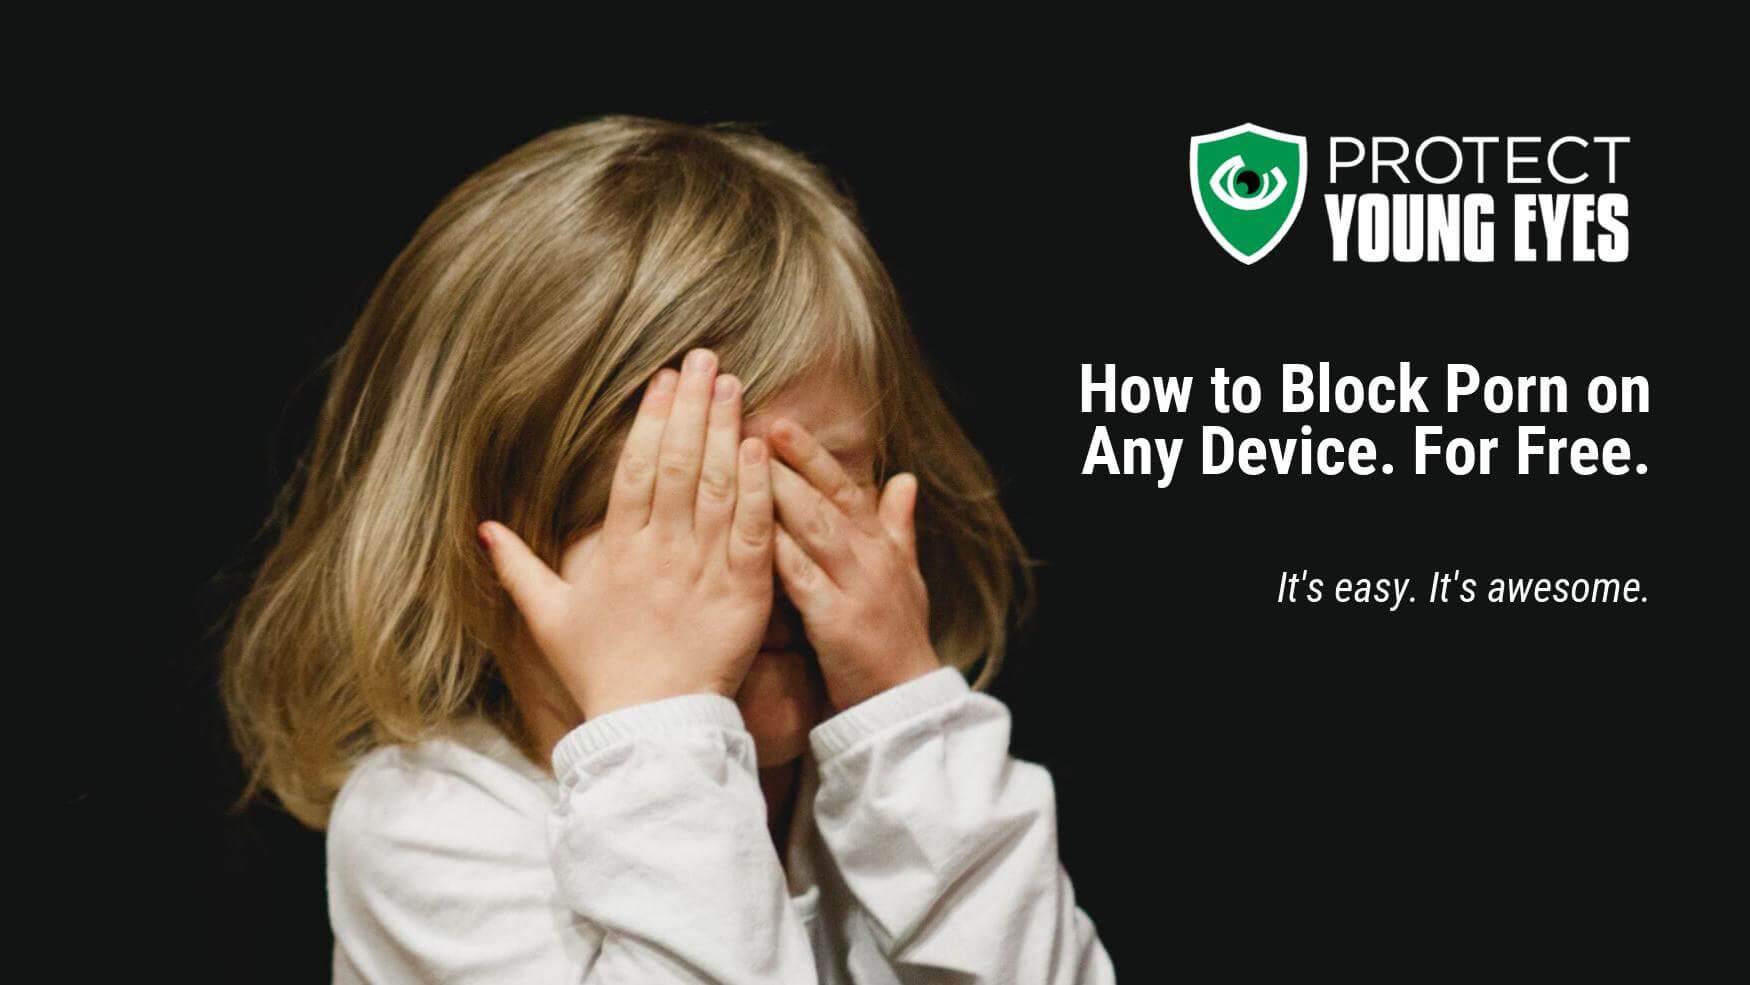 Ip Browers For Sx Videos - How to Block Porn on Any Device. For Free. A Protect Young Eyes Post.